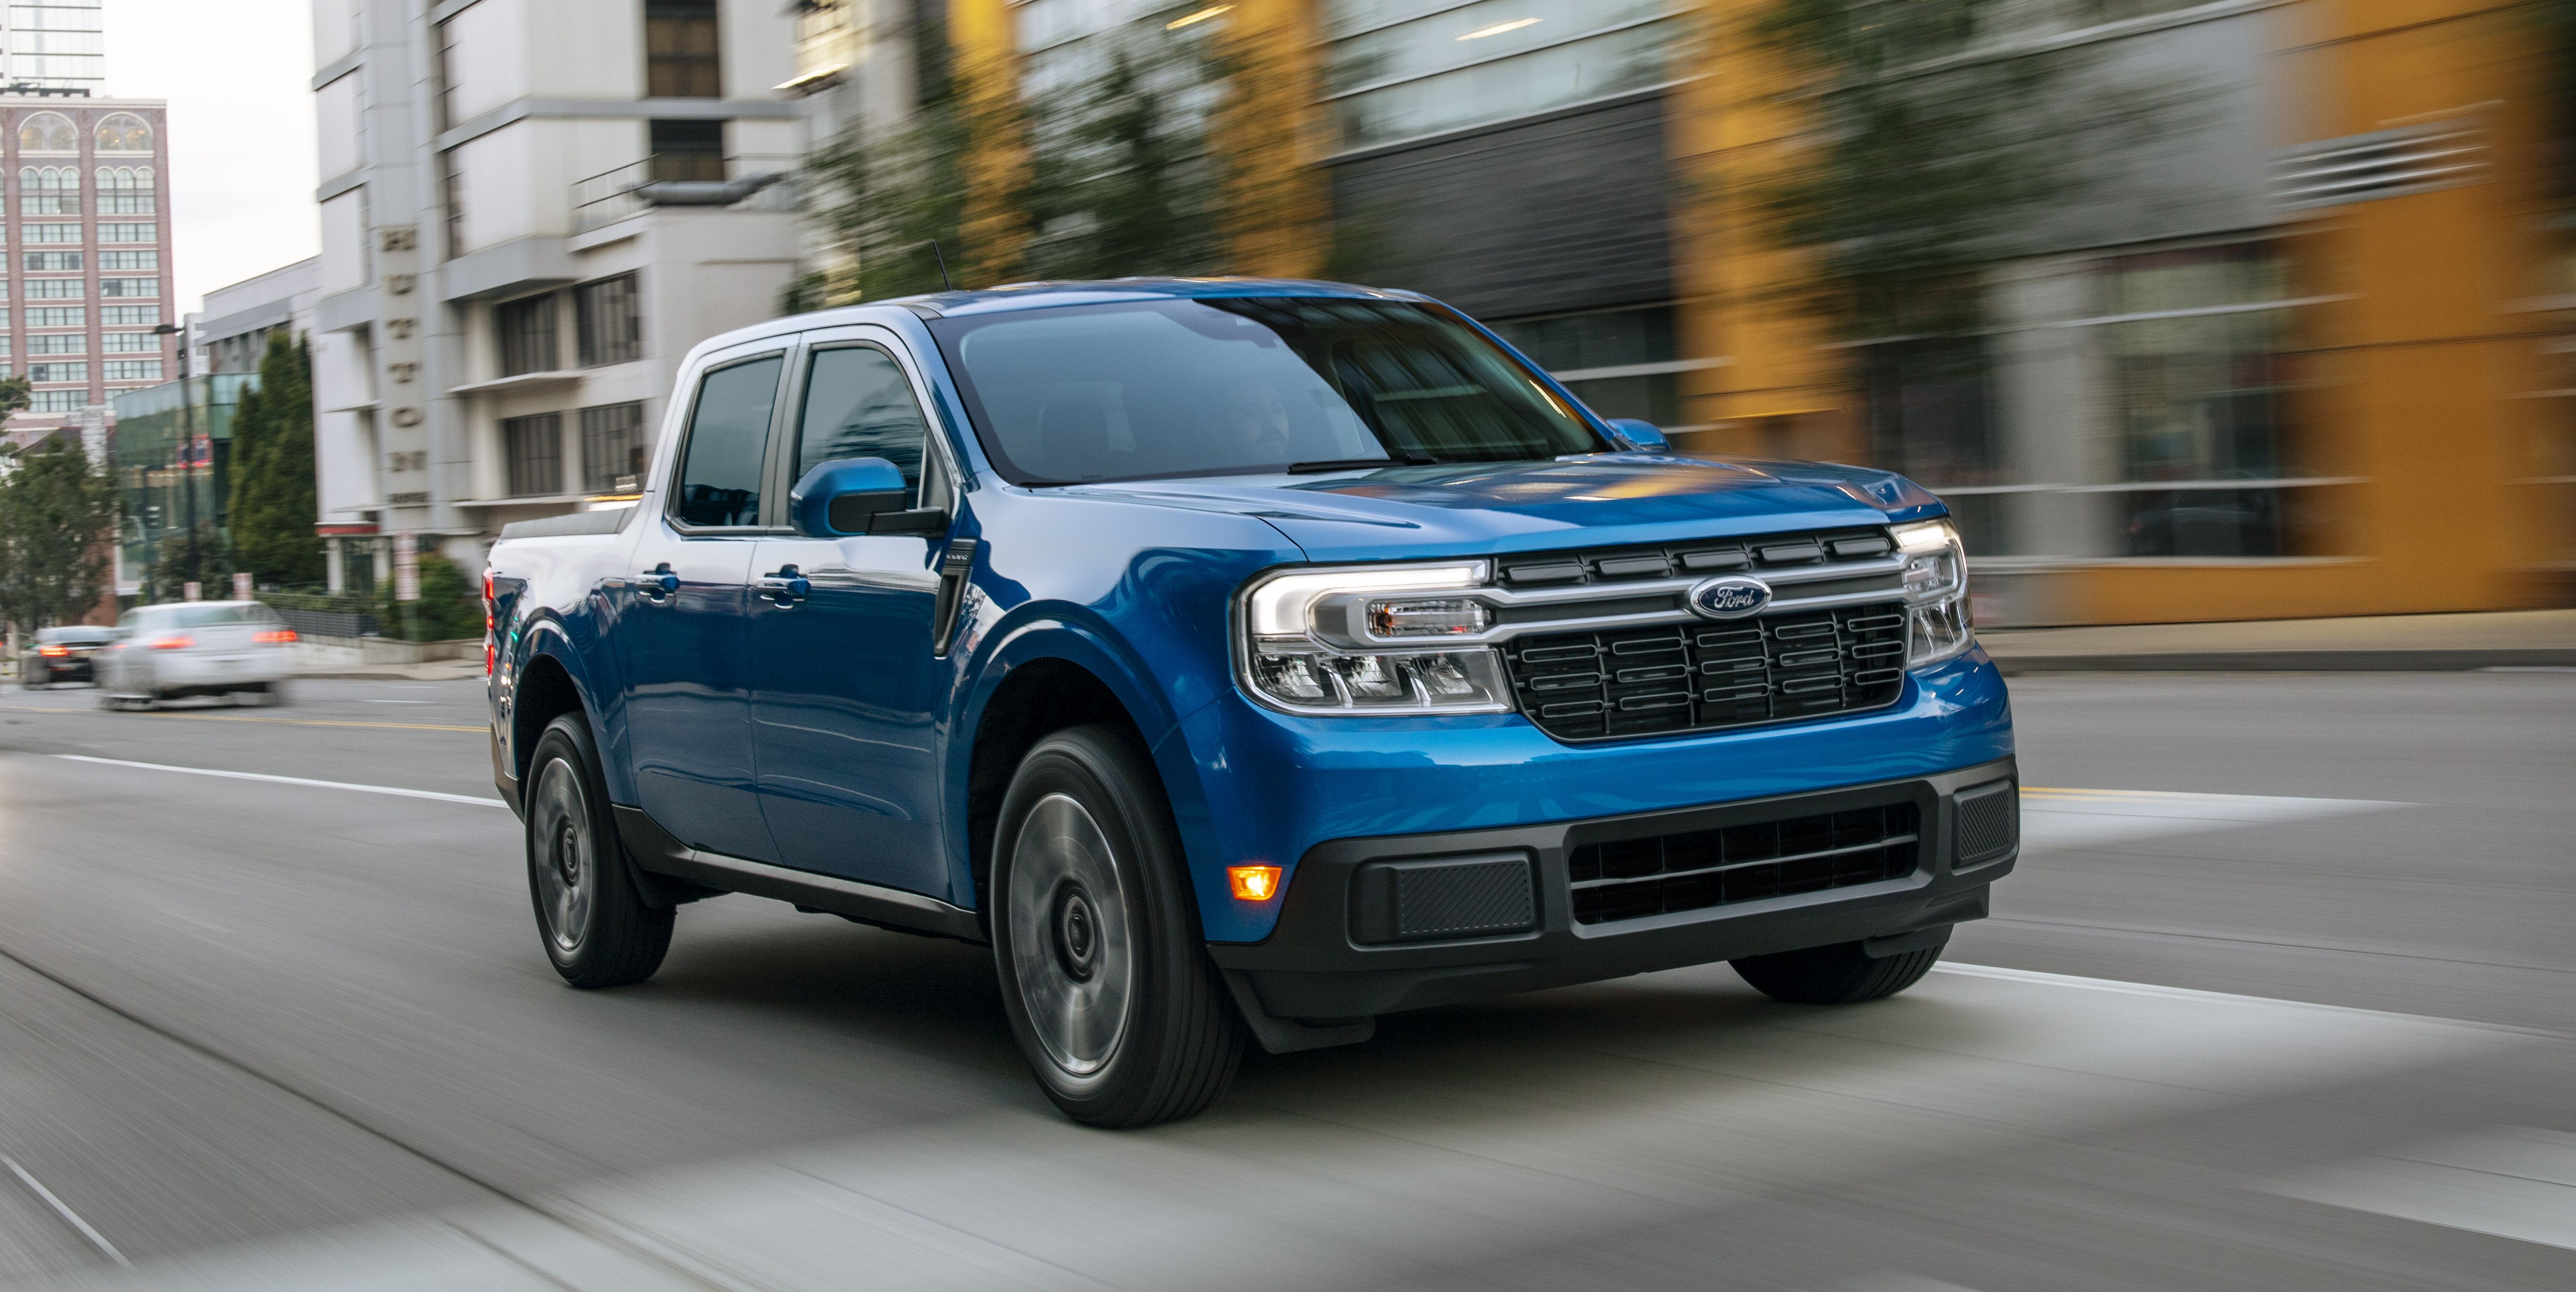 Ford Recalls Over 60,000 Mavericks Over Faulty Cluster